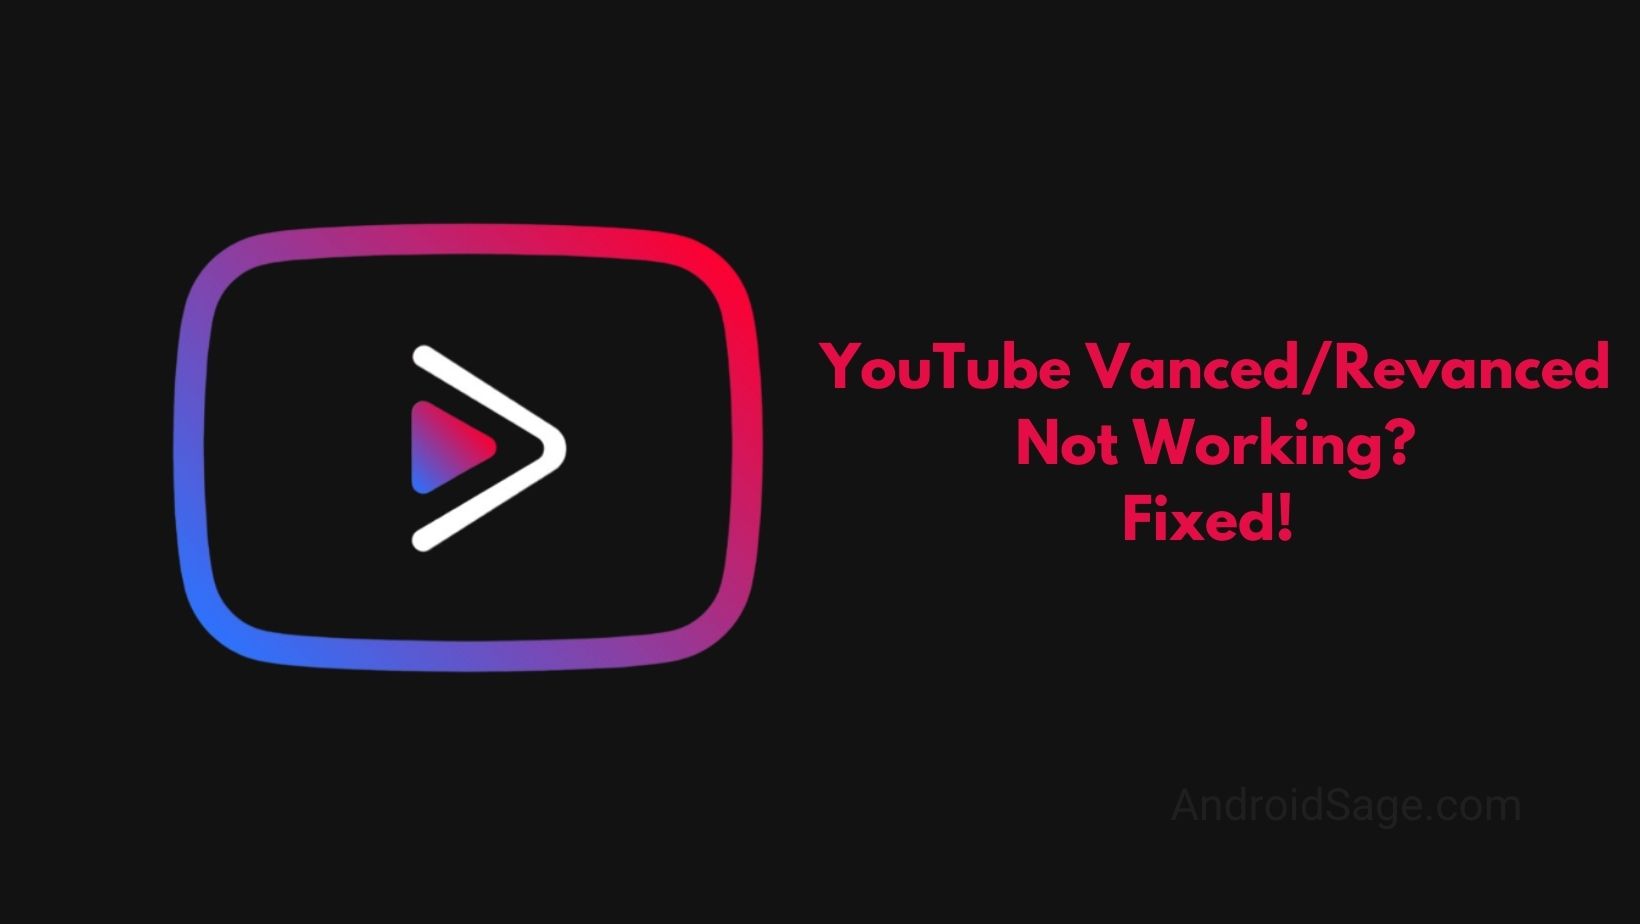 YouTube Vanced or Revanced Not Working Fixed